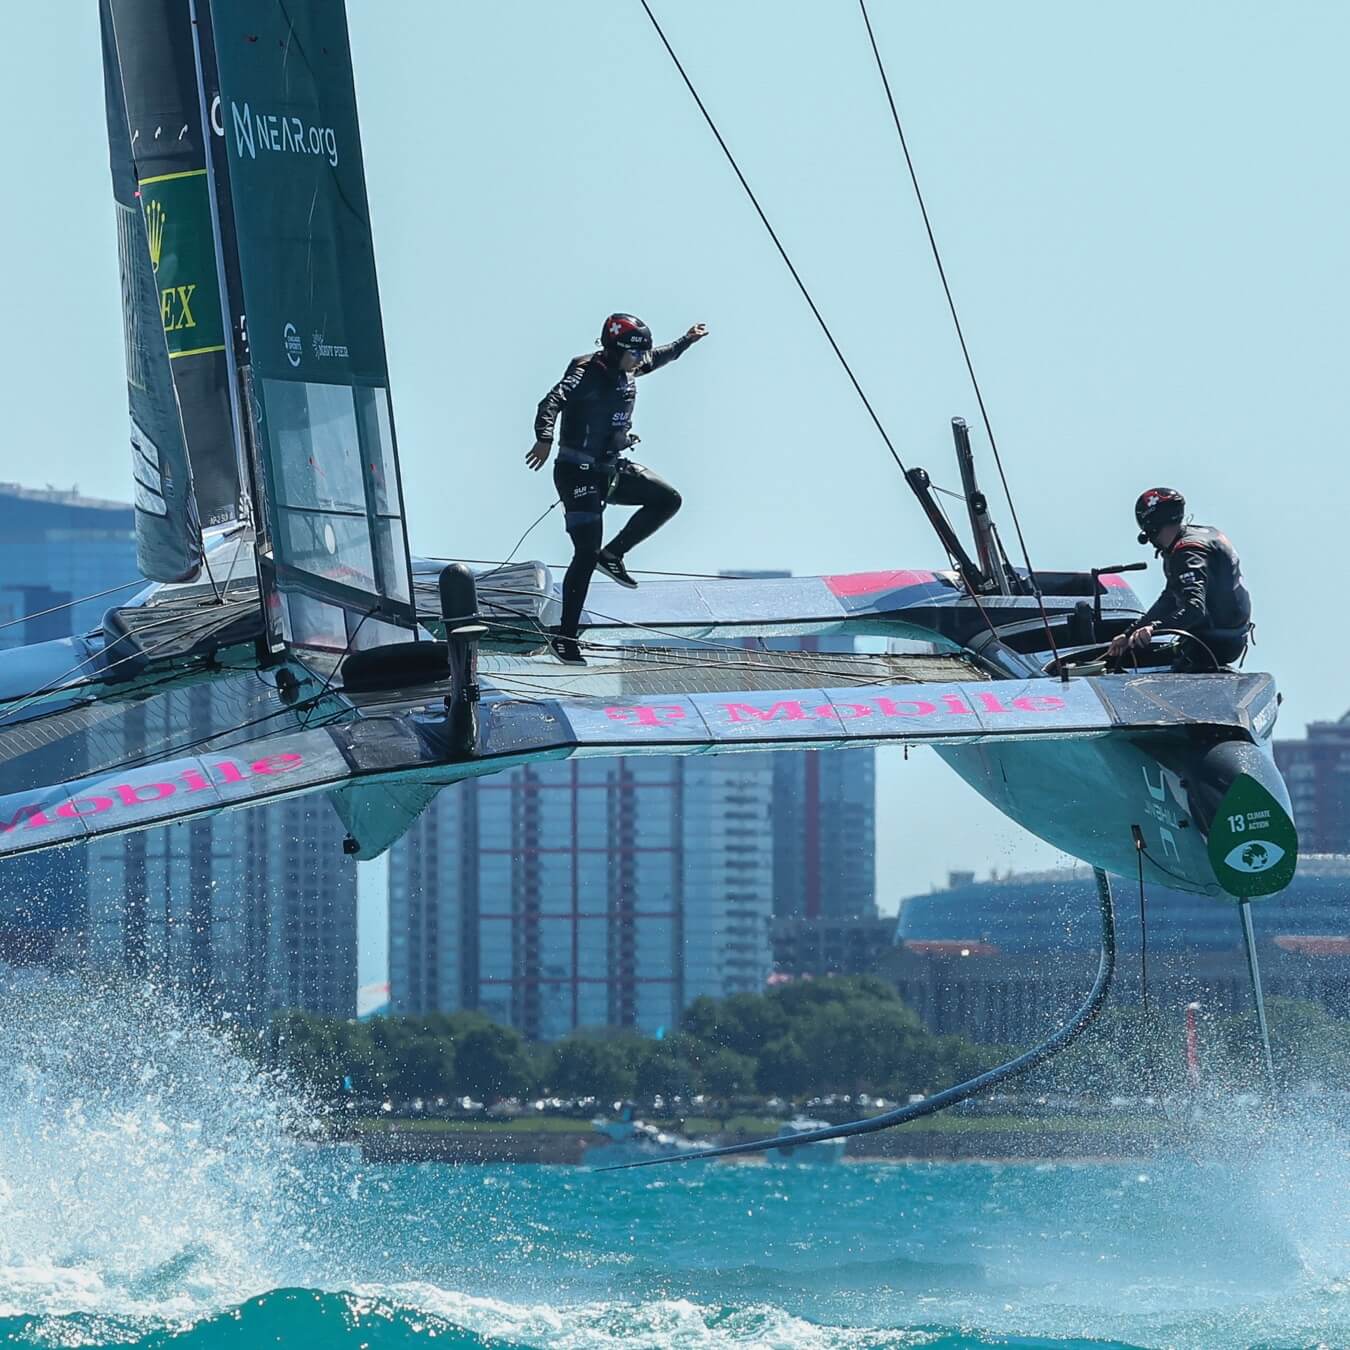 Rolex and Yachting SailGP